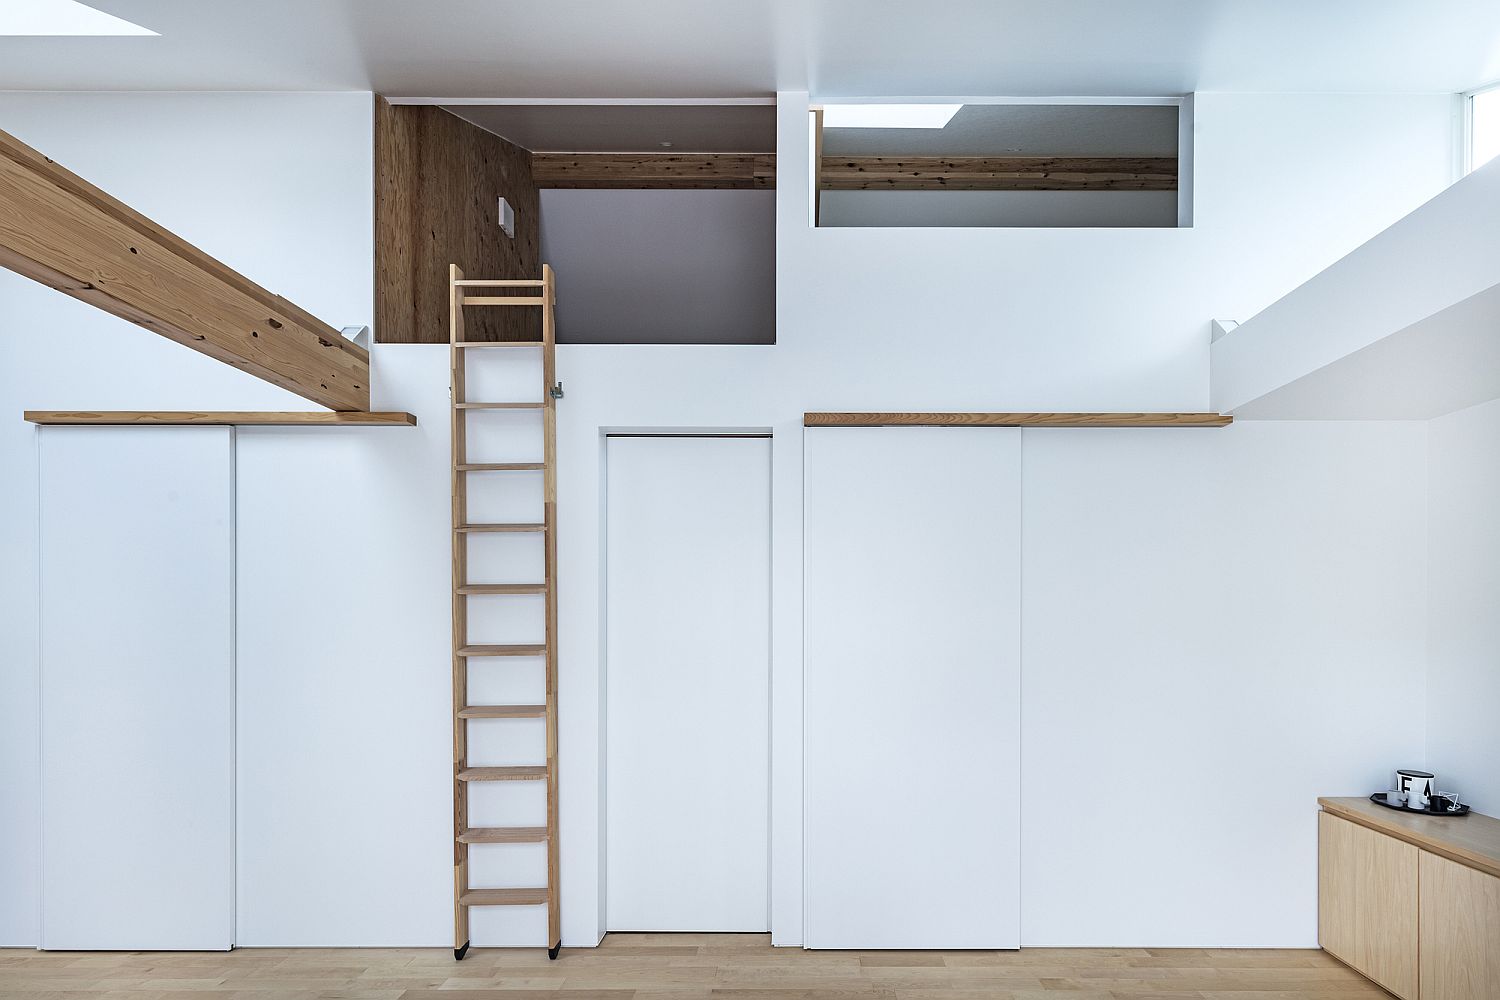 Ladder leading to the loft level inside the Japanese home